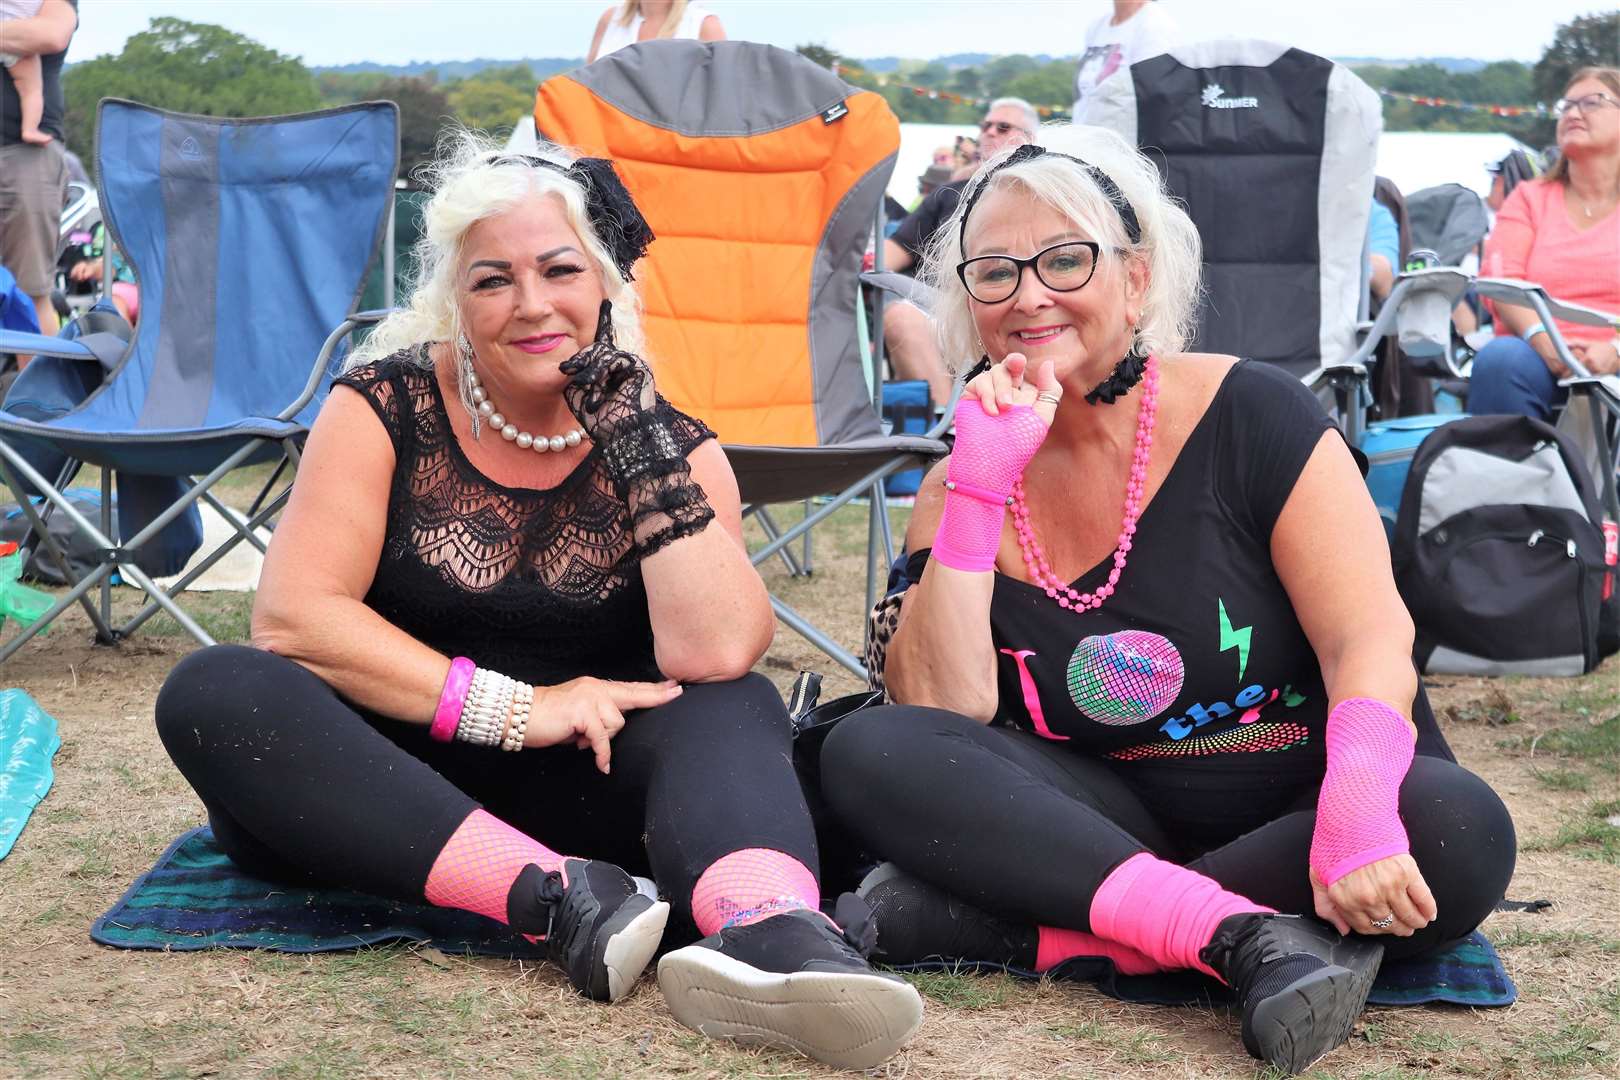 Leg warmers made a comeback for the day. Picture: Rachel Evans